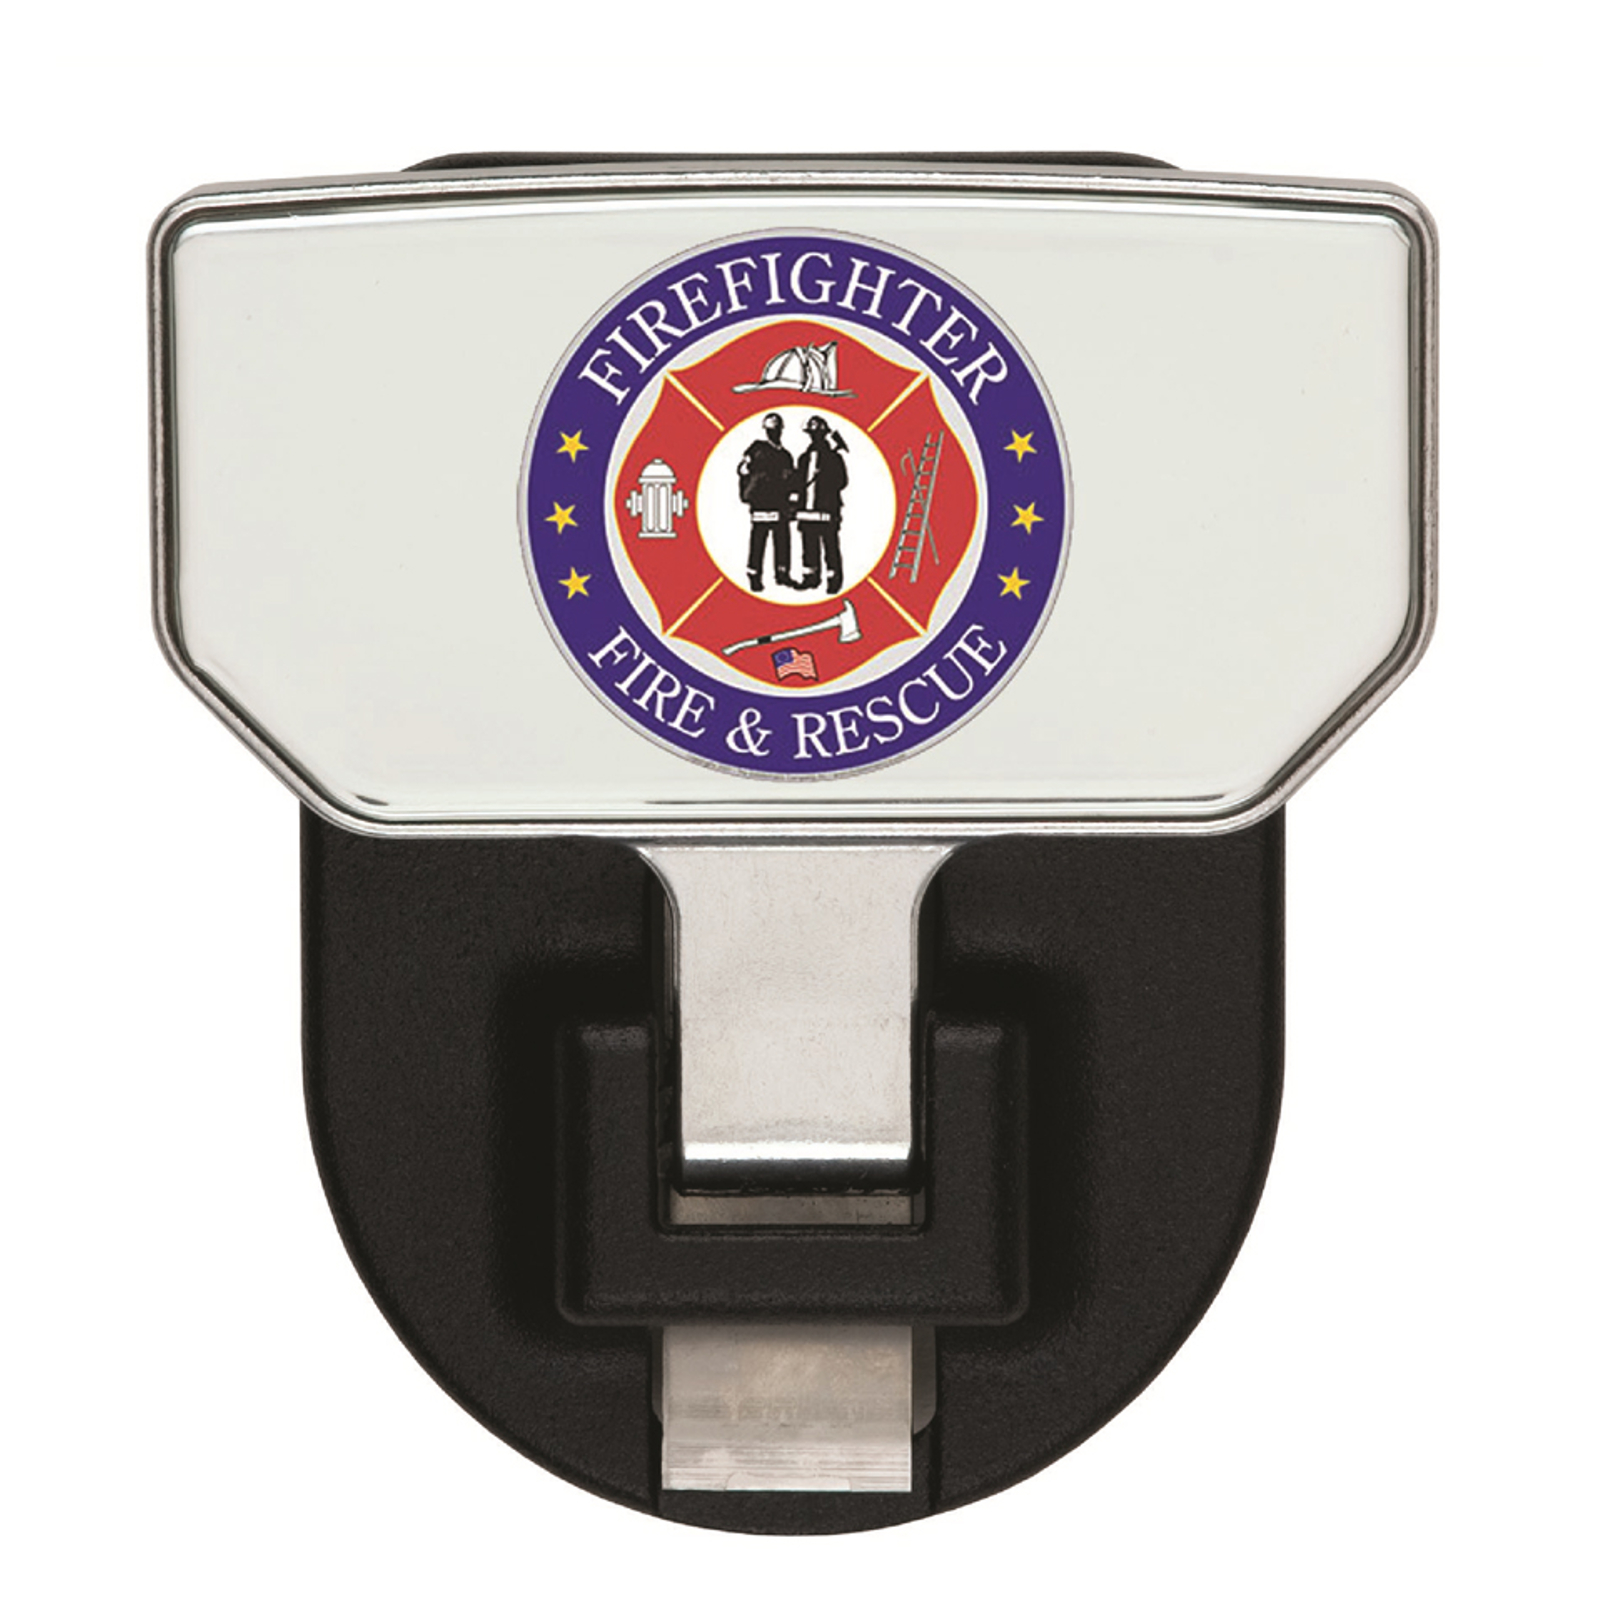 Fire & Rescue Tow Hook Step